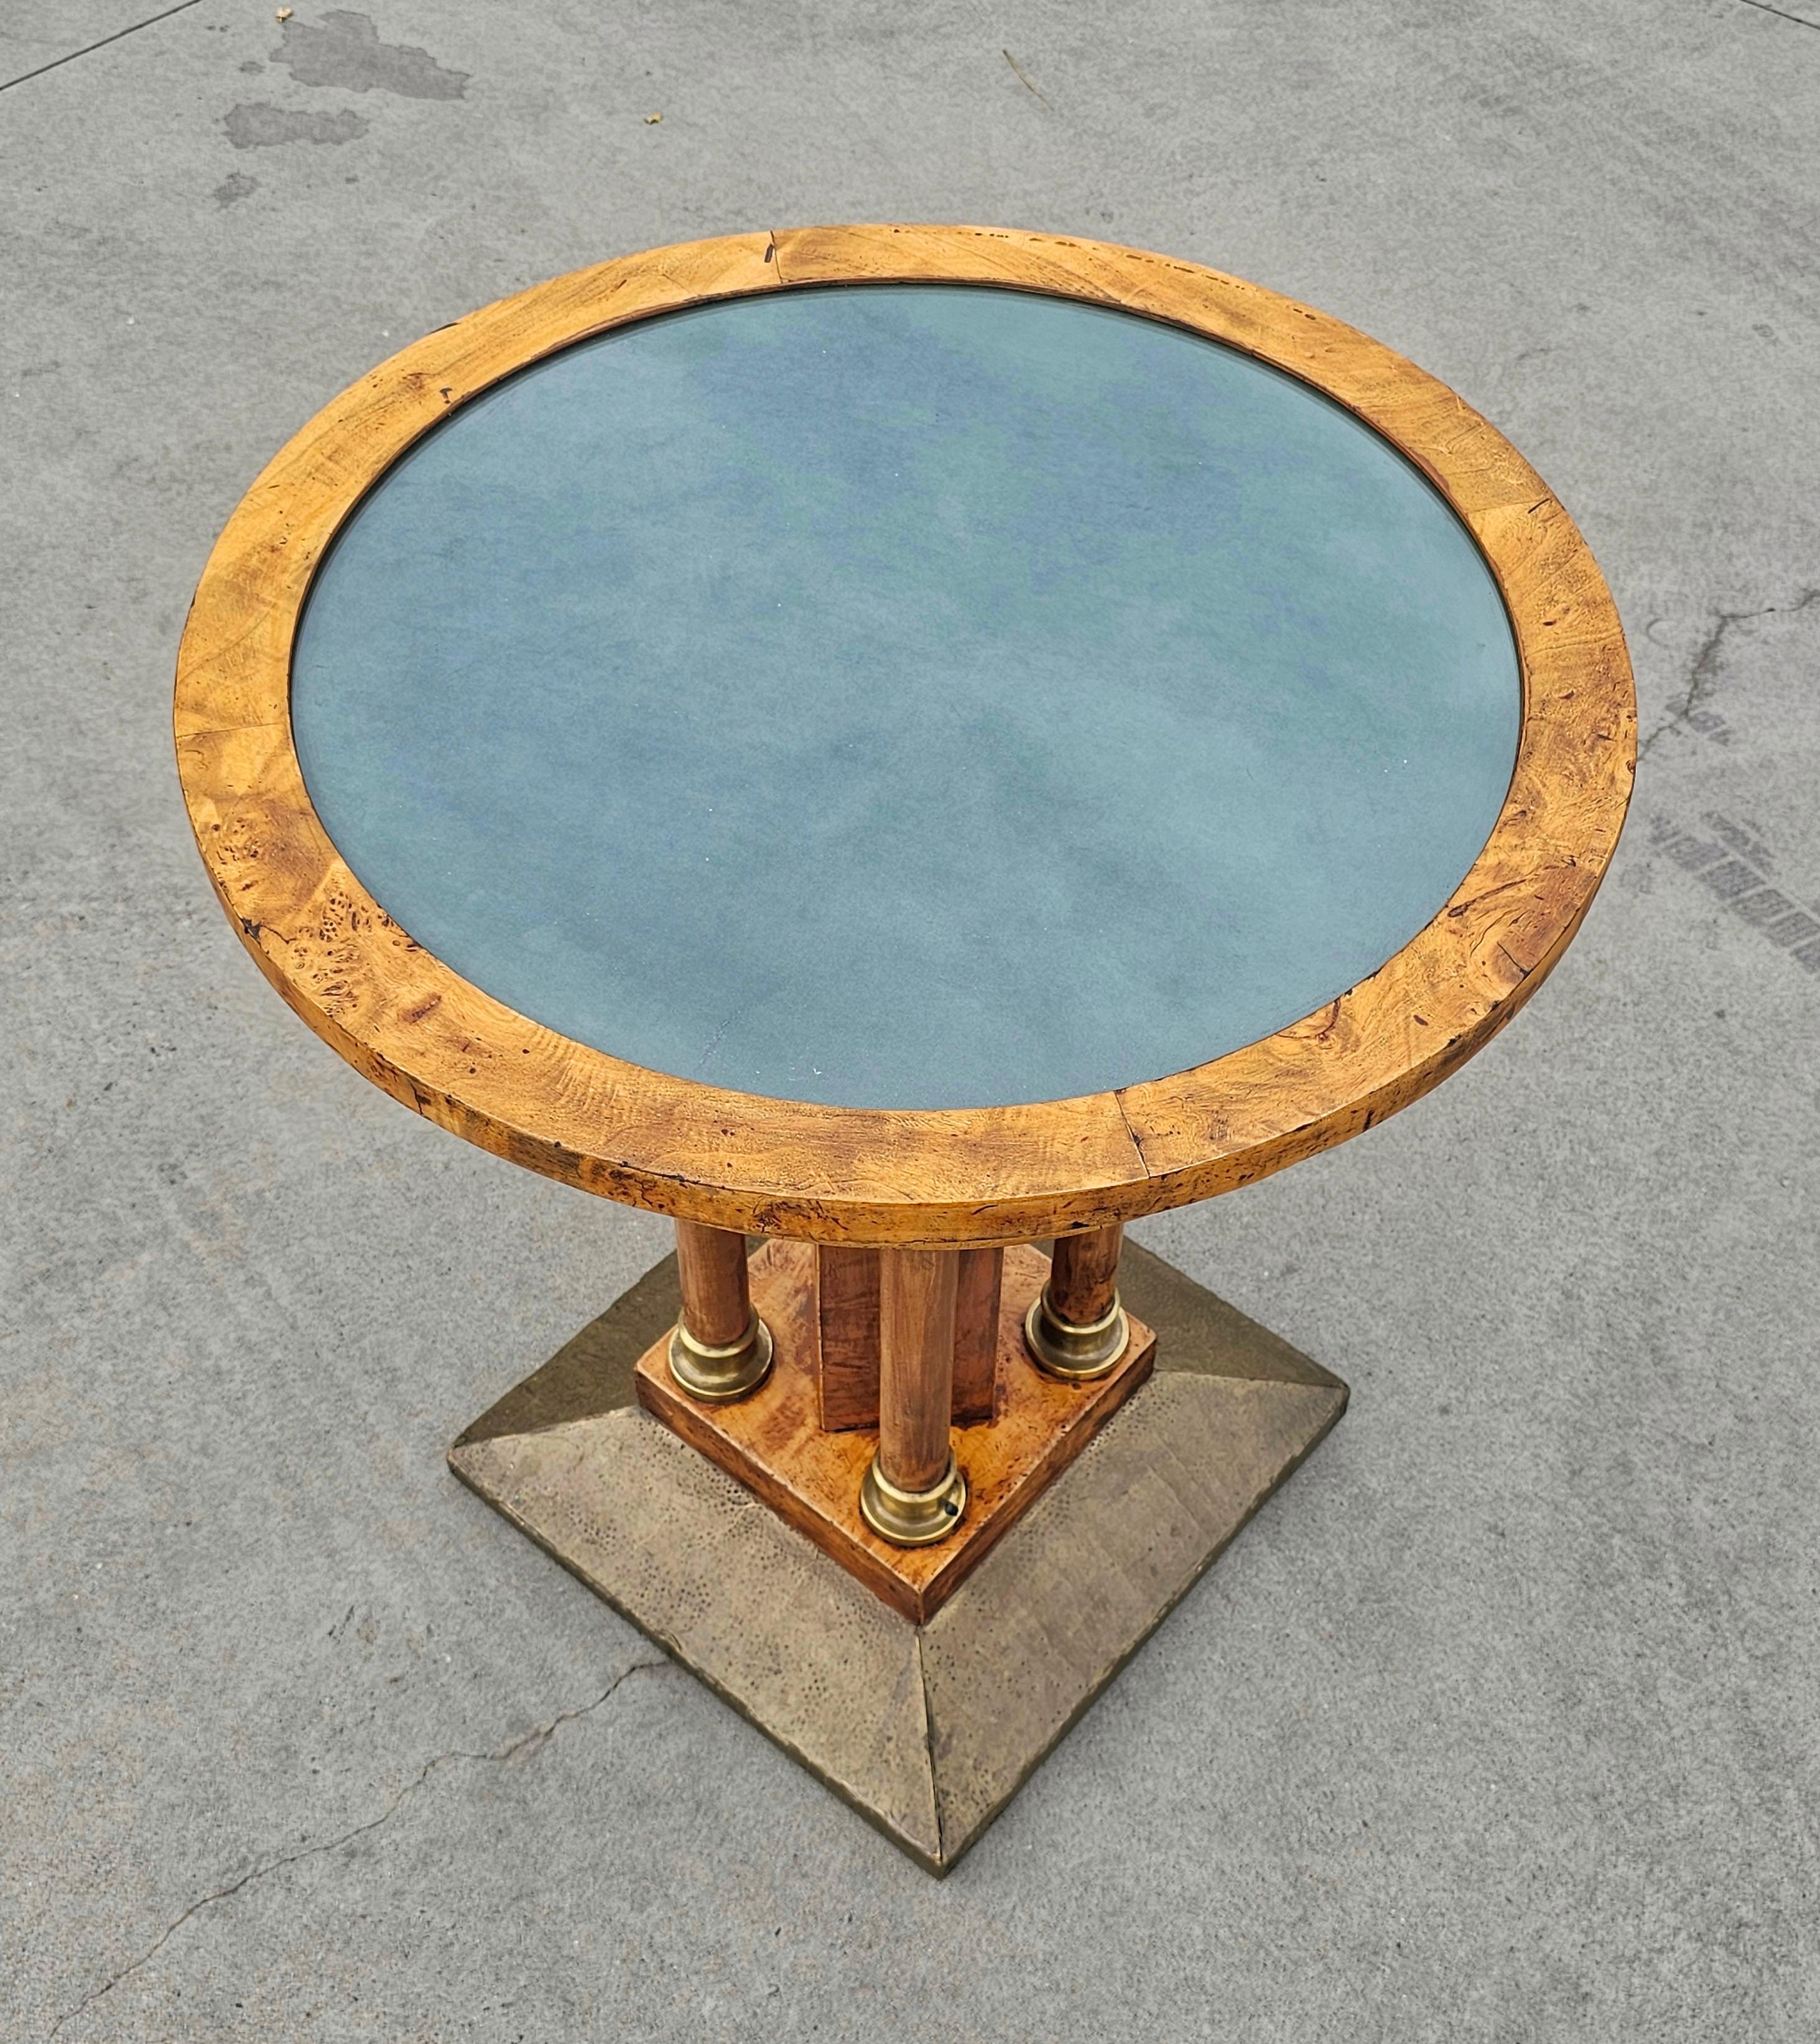 Viennese Secessionist Gueridon Table done in Birdseye Maple, Austria 1900s For Sale 1